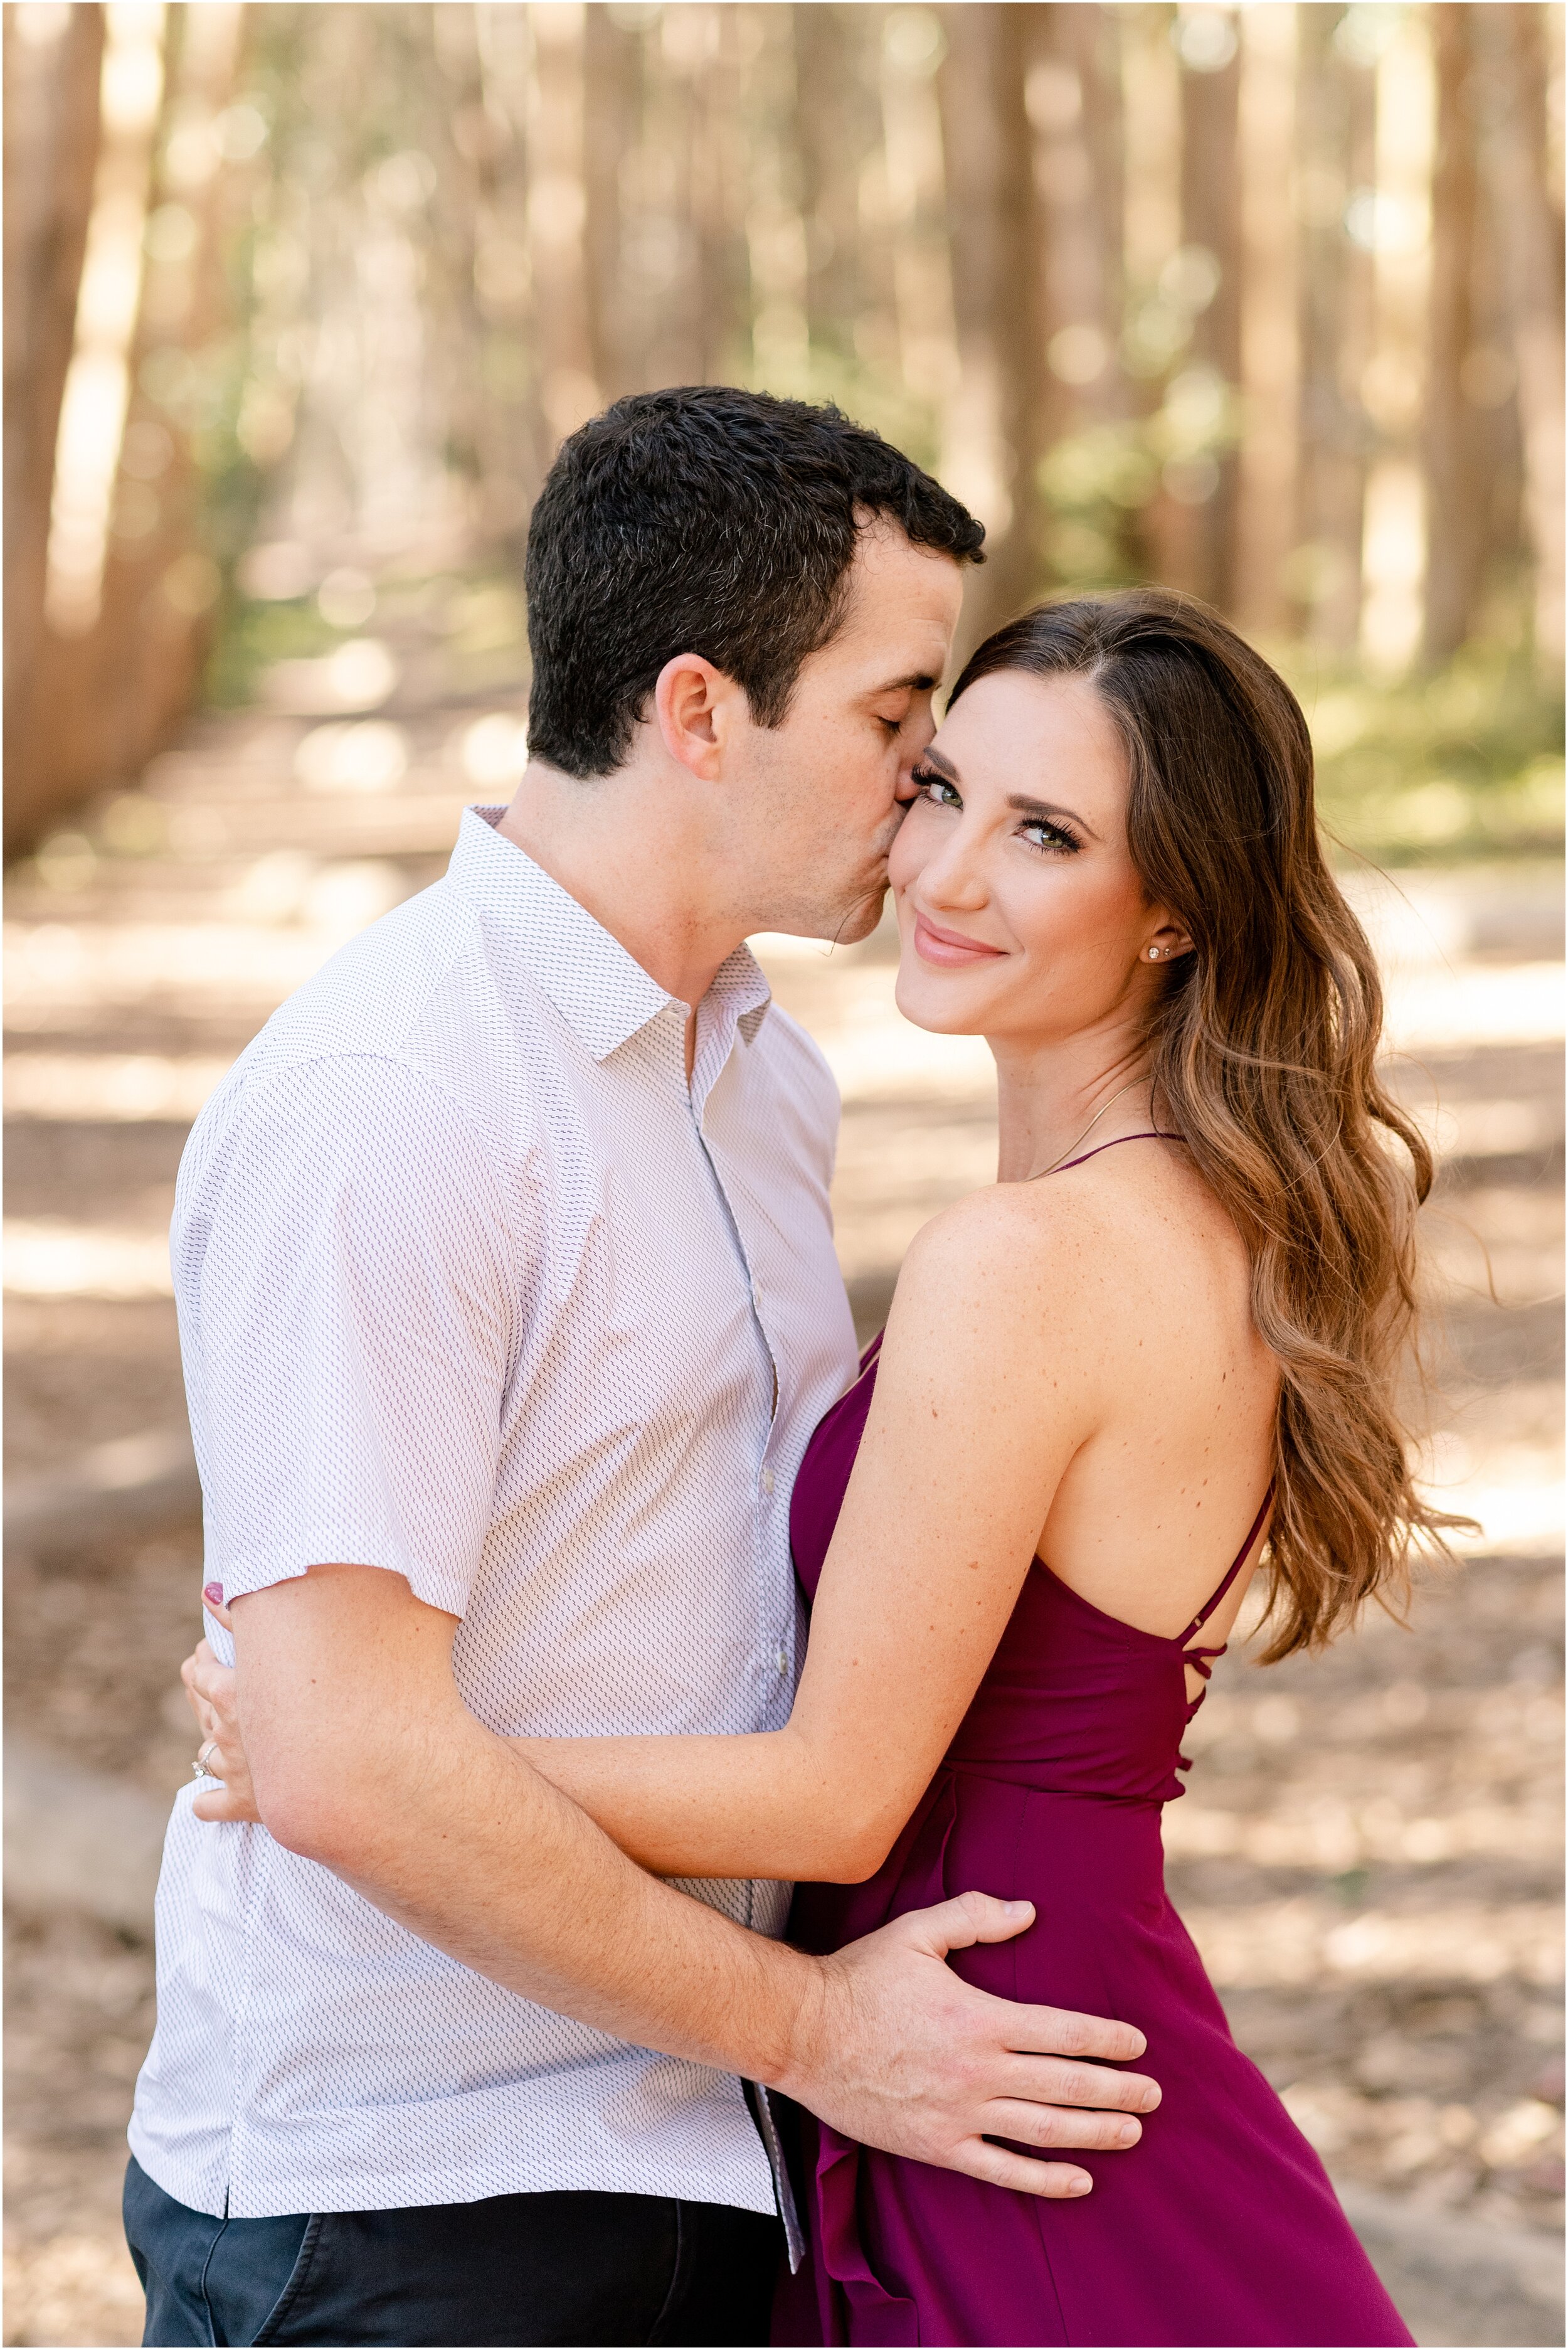 hannah leigh photography Baker Beach, Lovers Lane. Palace of Fine Arts Engagement Session San Franscico, CA_4833.jpg